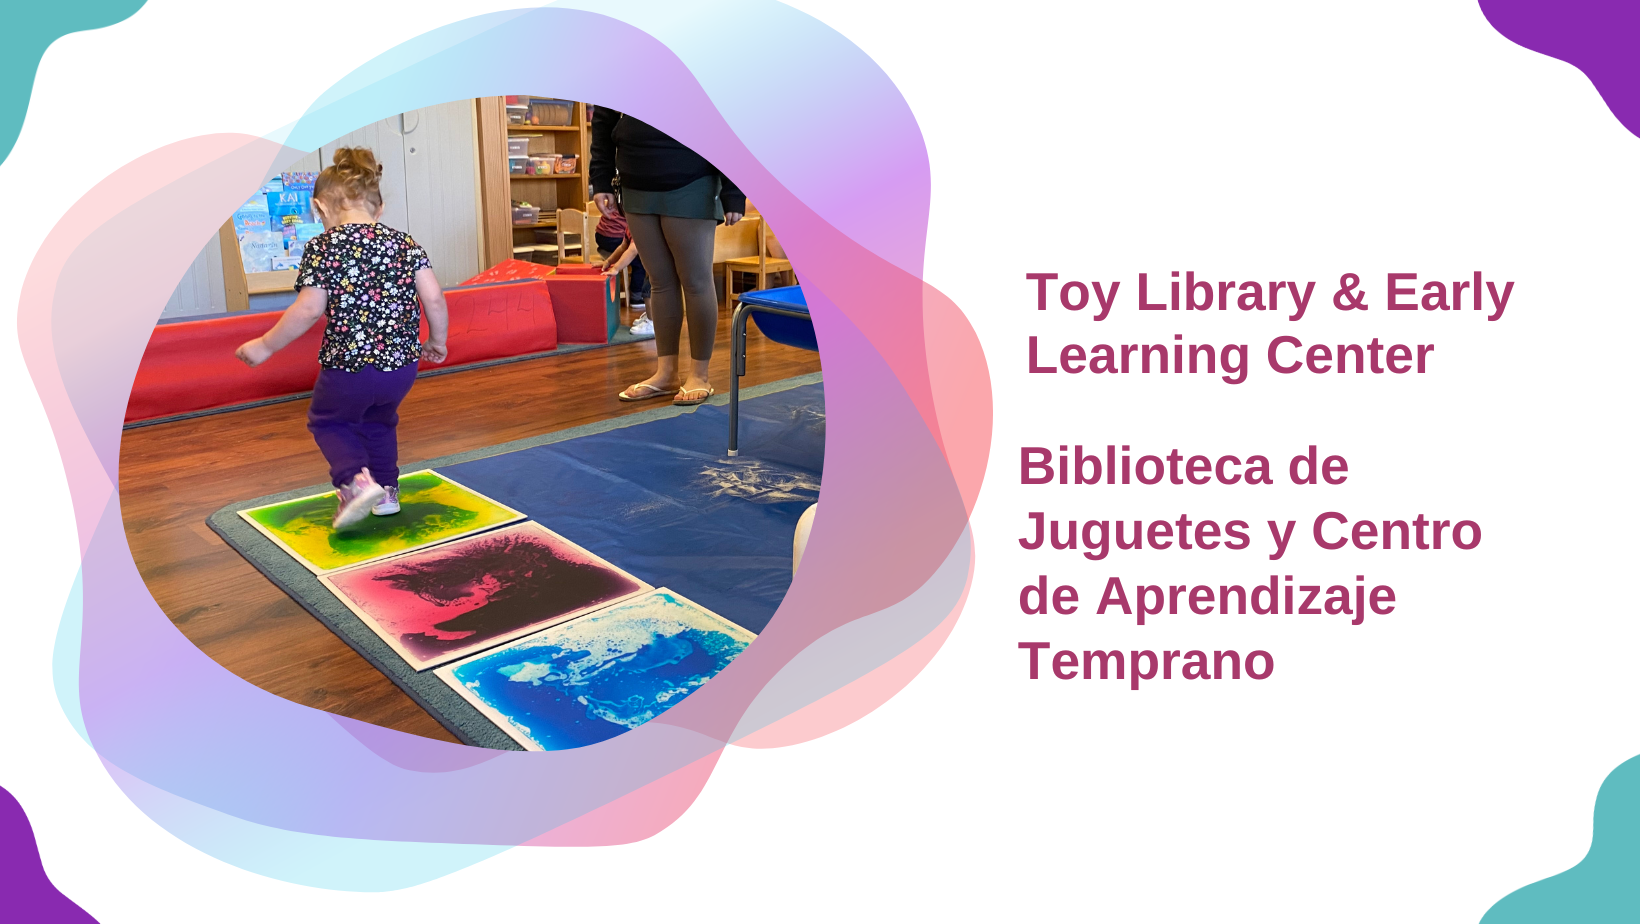 This image is depicting a Toy Library and Early Learning Center, which provides educational resources for children. Full Text: Toy Library & Early Learning Center Biblioteca de Juguetes y Centro de Aprendizaje Temprano